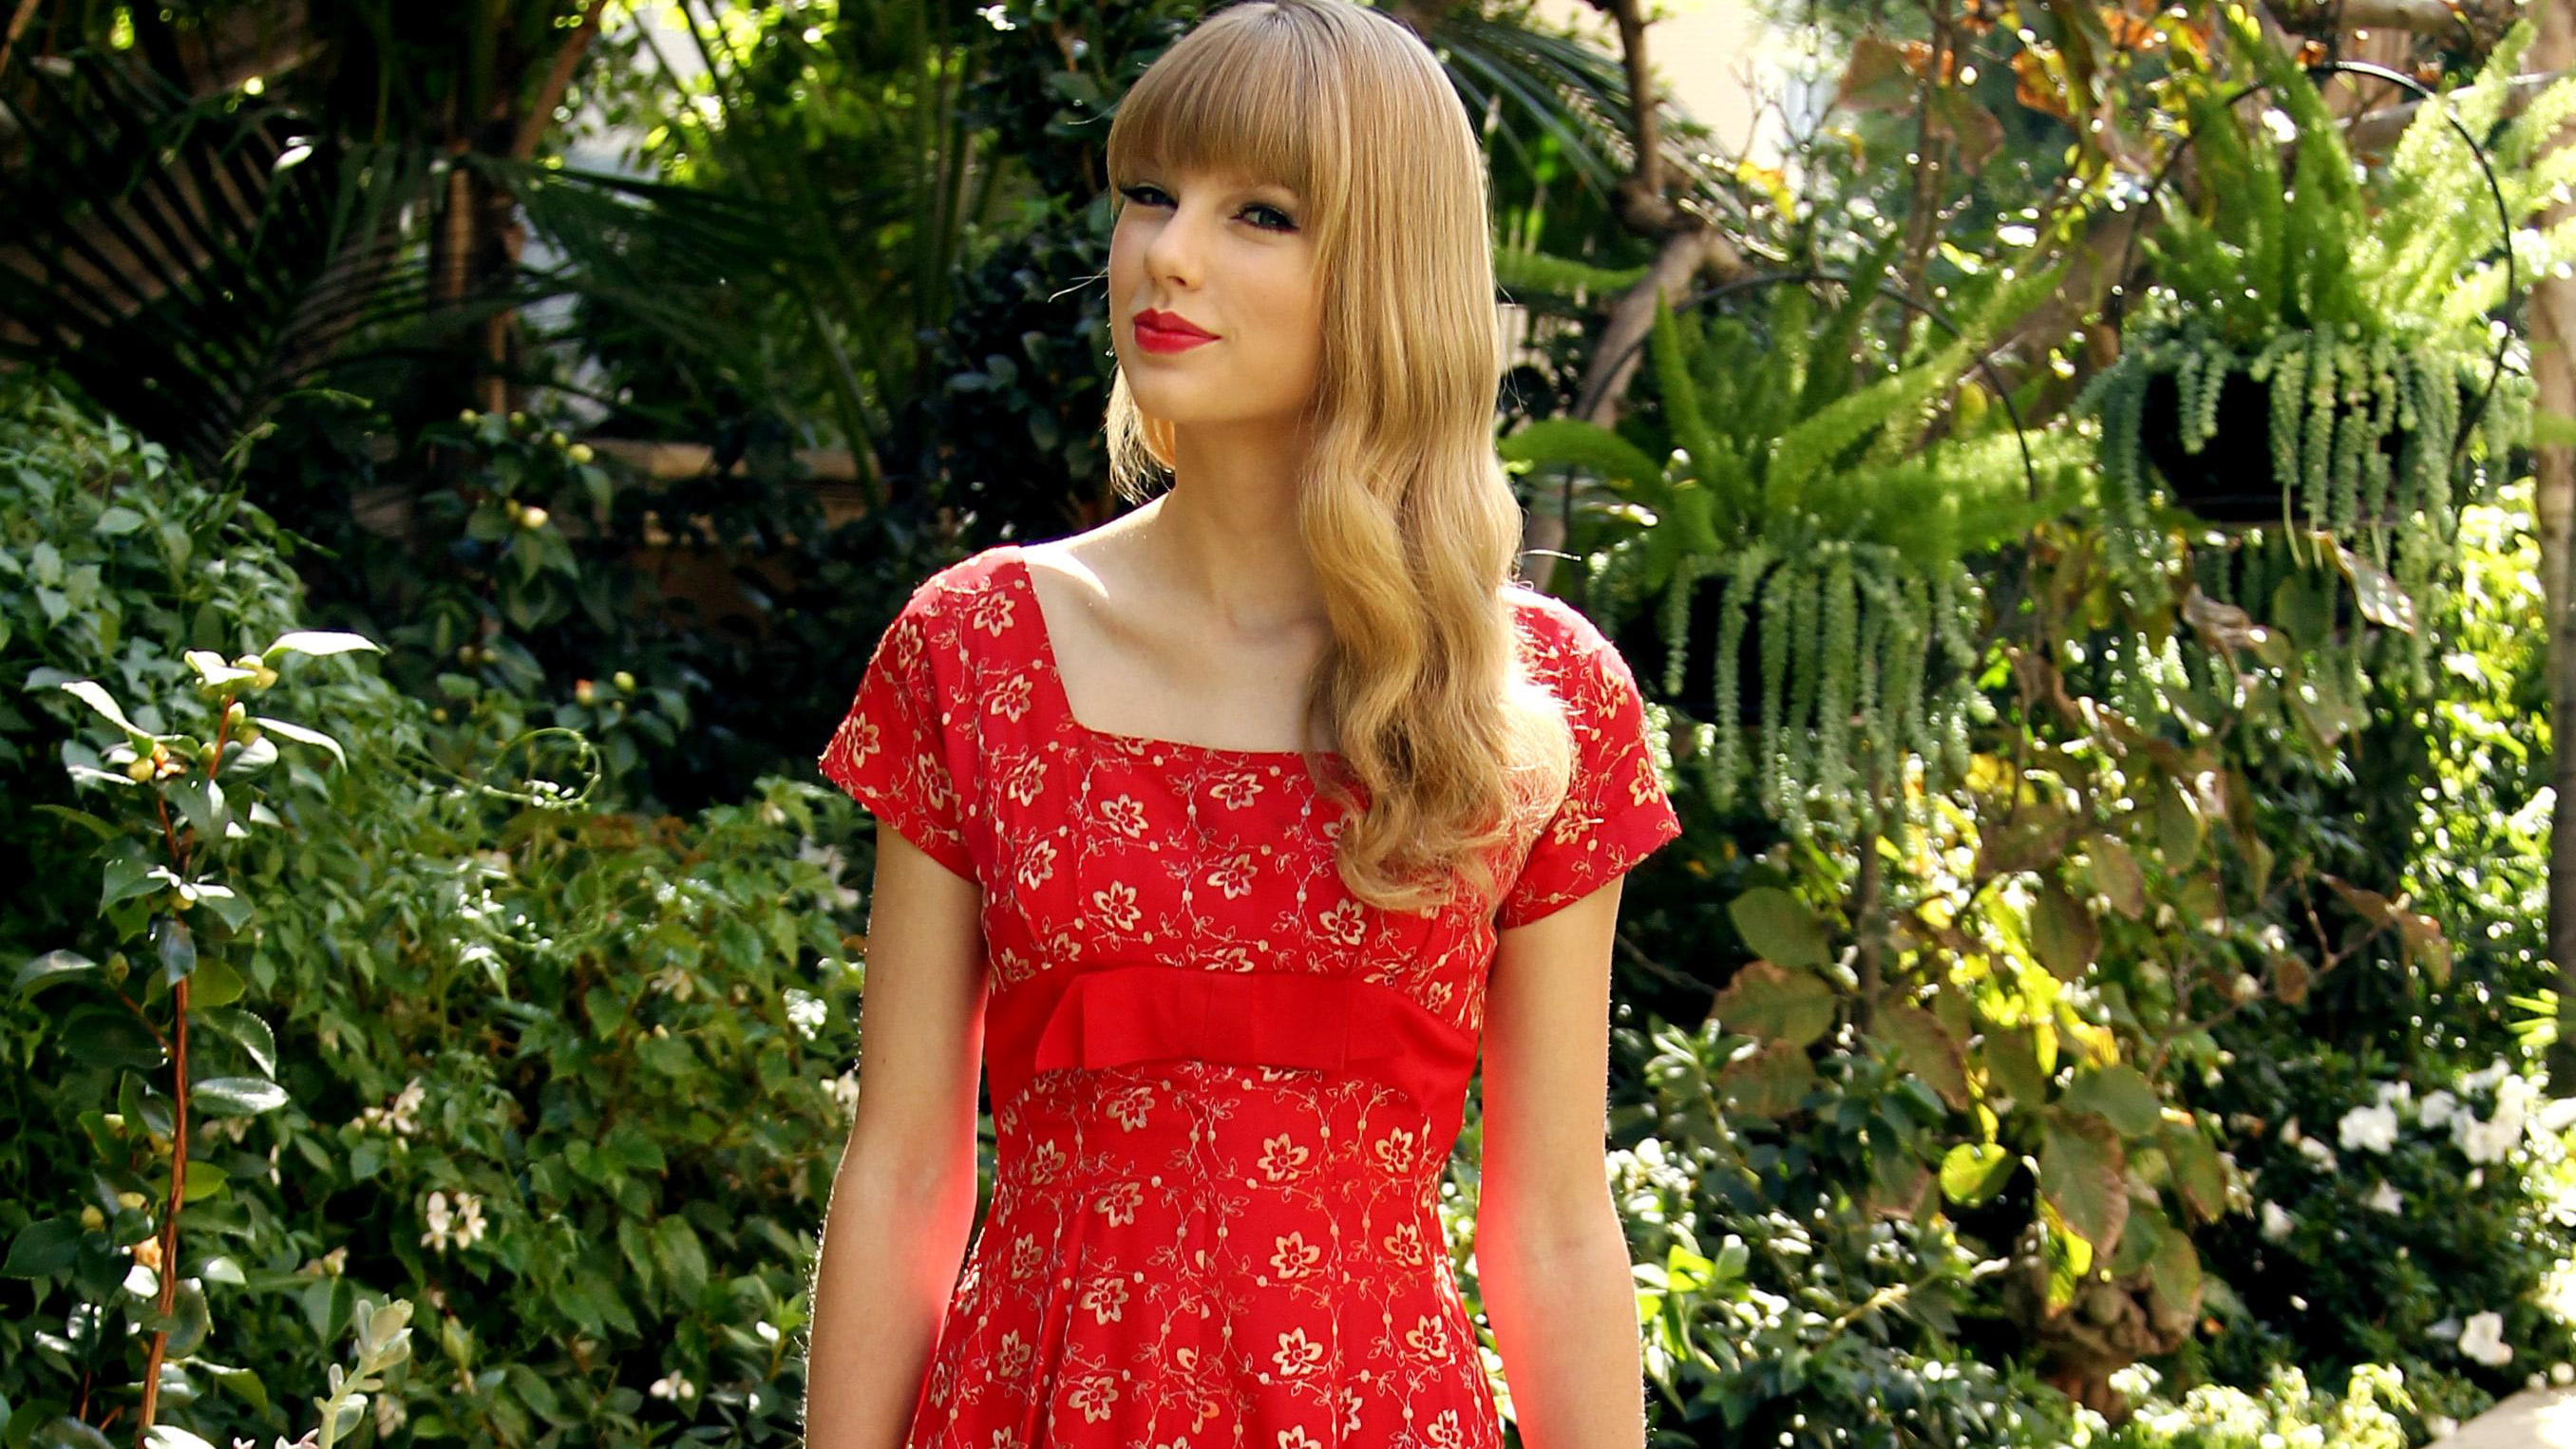 women, Taylor Swift, singer, one person, hair, plant, standing